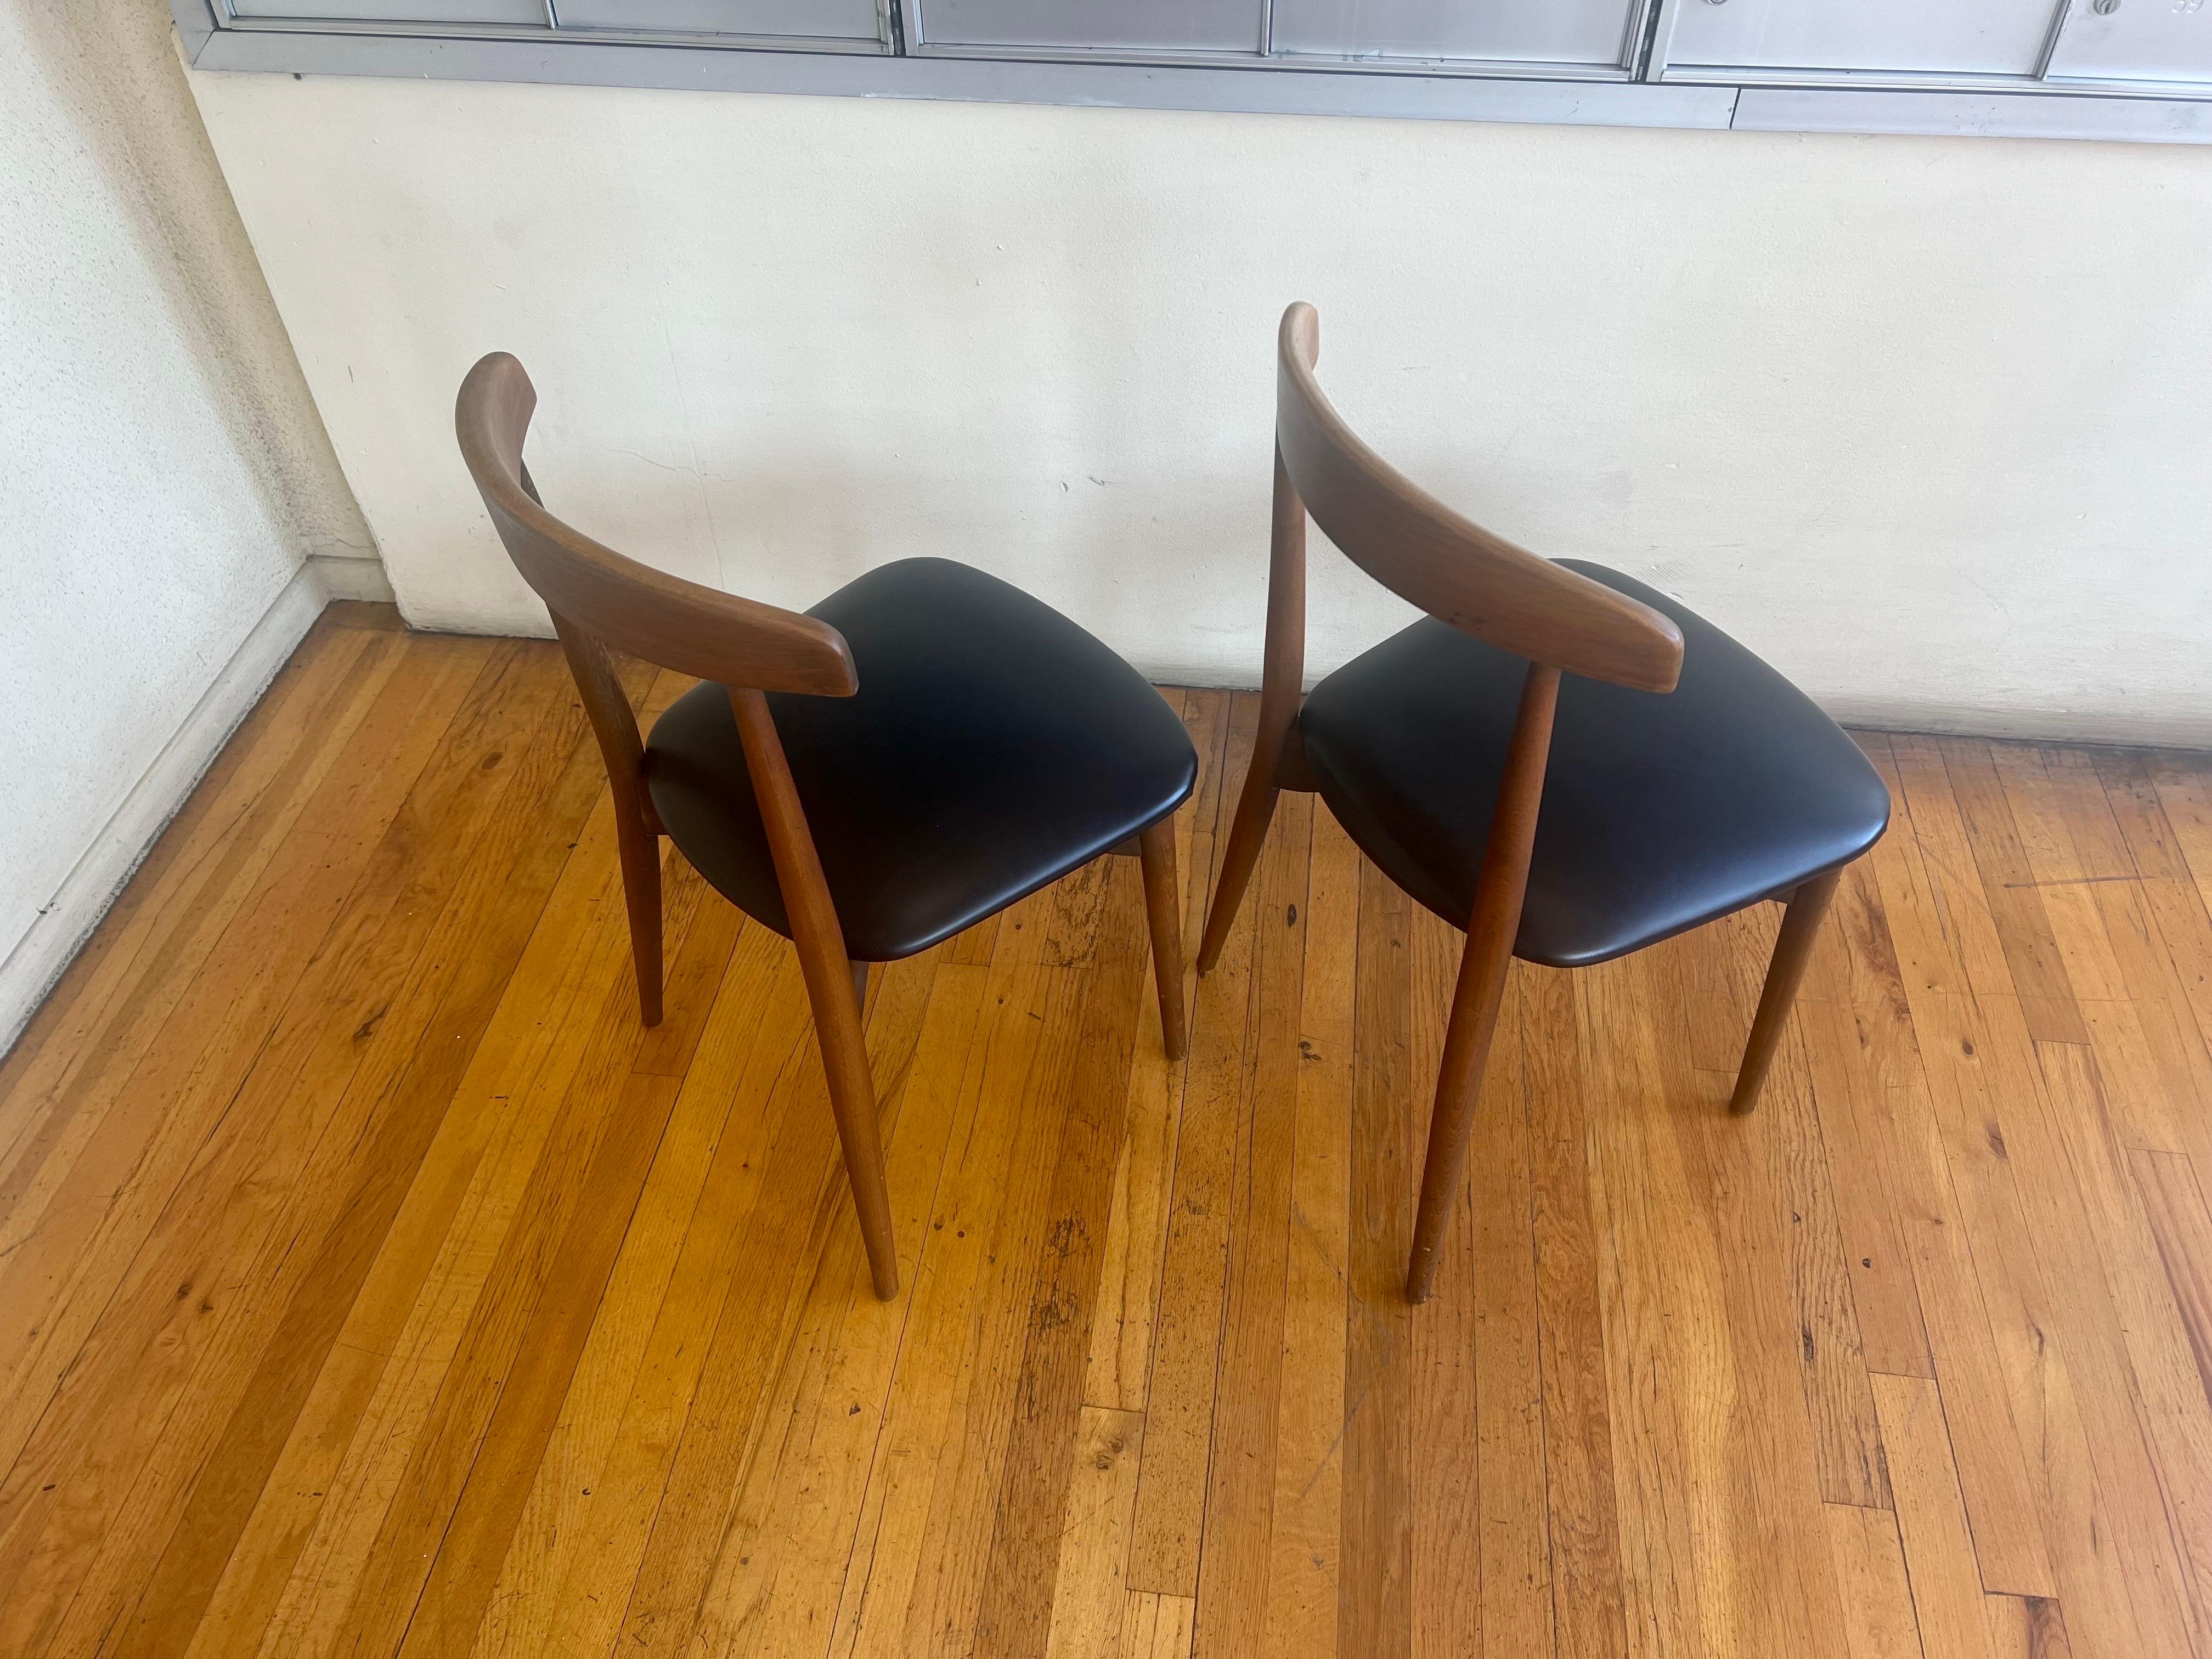 20th Century American Mid century Modern Walnut Desk/Dining Chairs 3 Available For Sale